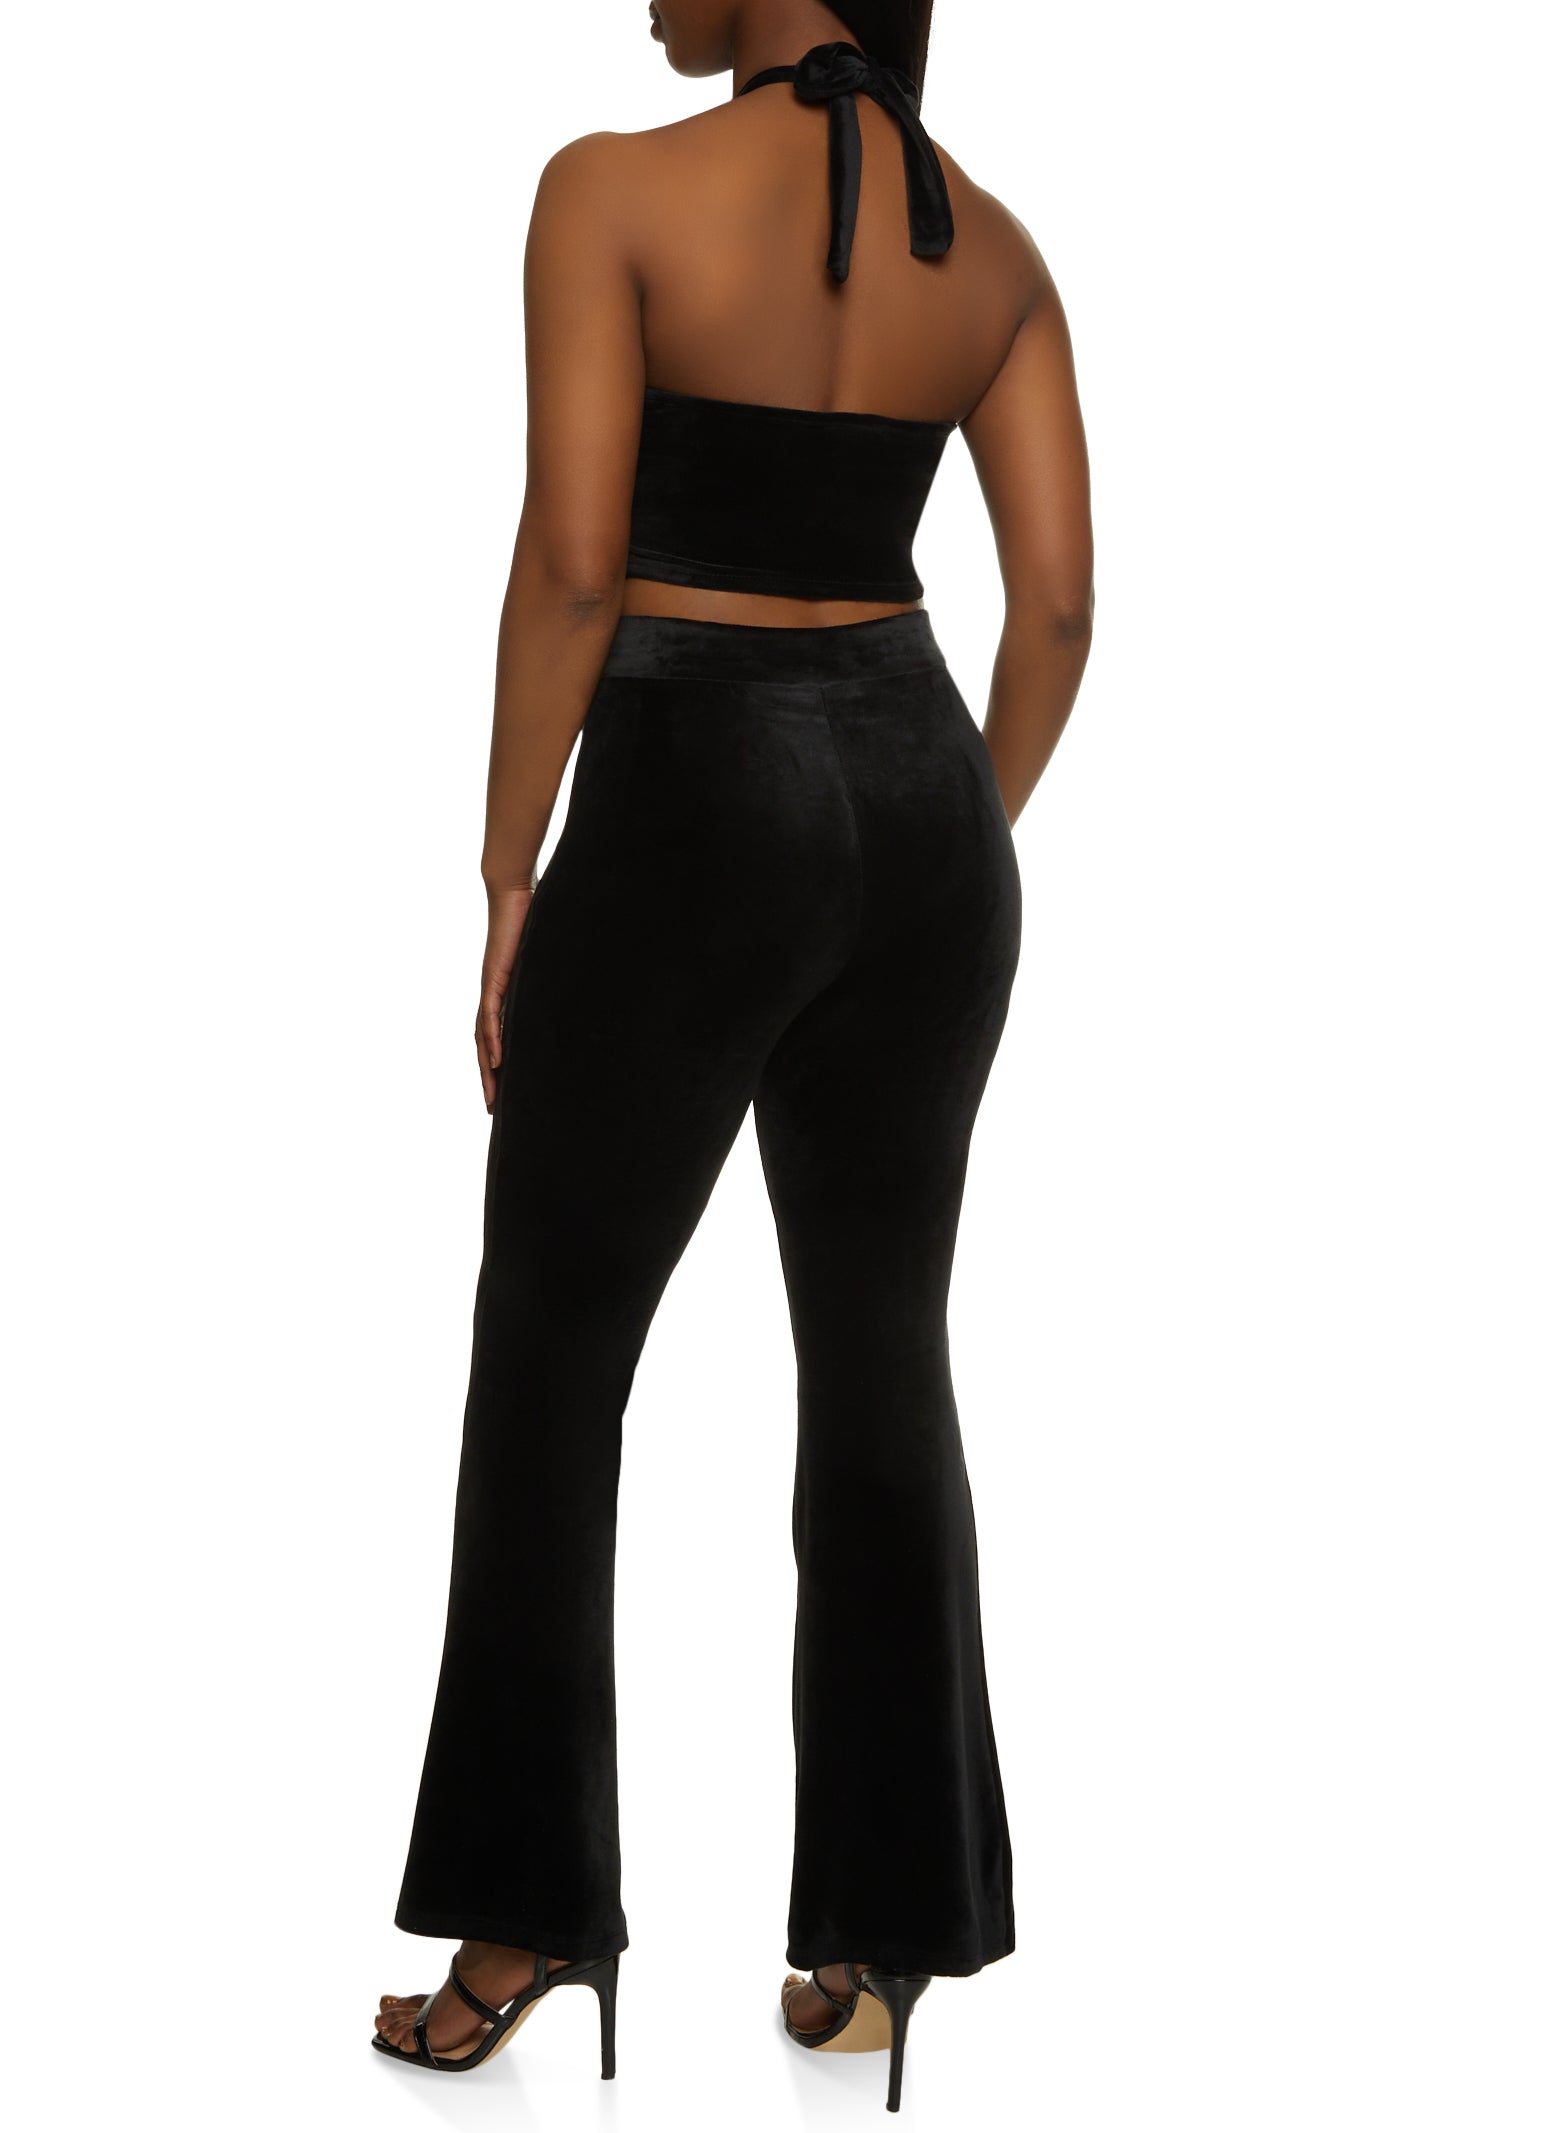 Velour Cut Out Halter Crop Top and Flared Pants